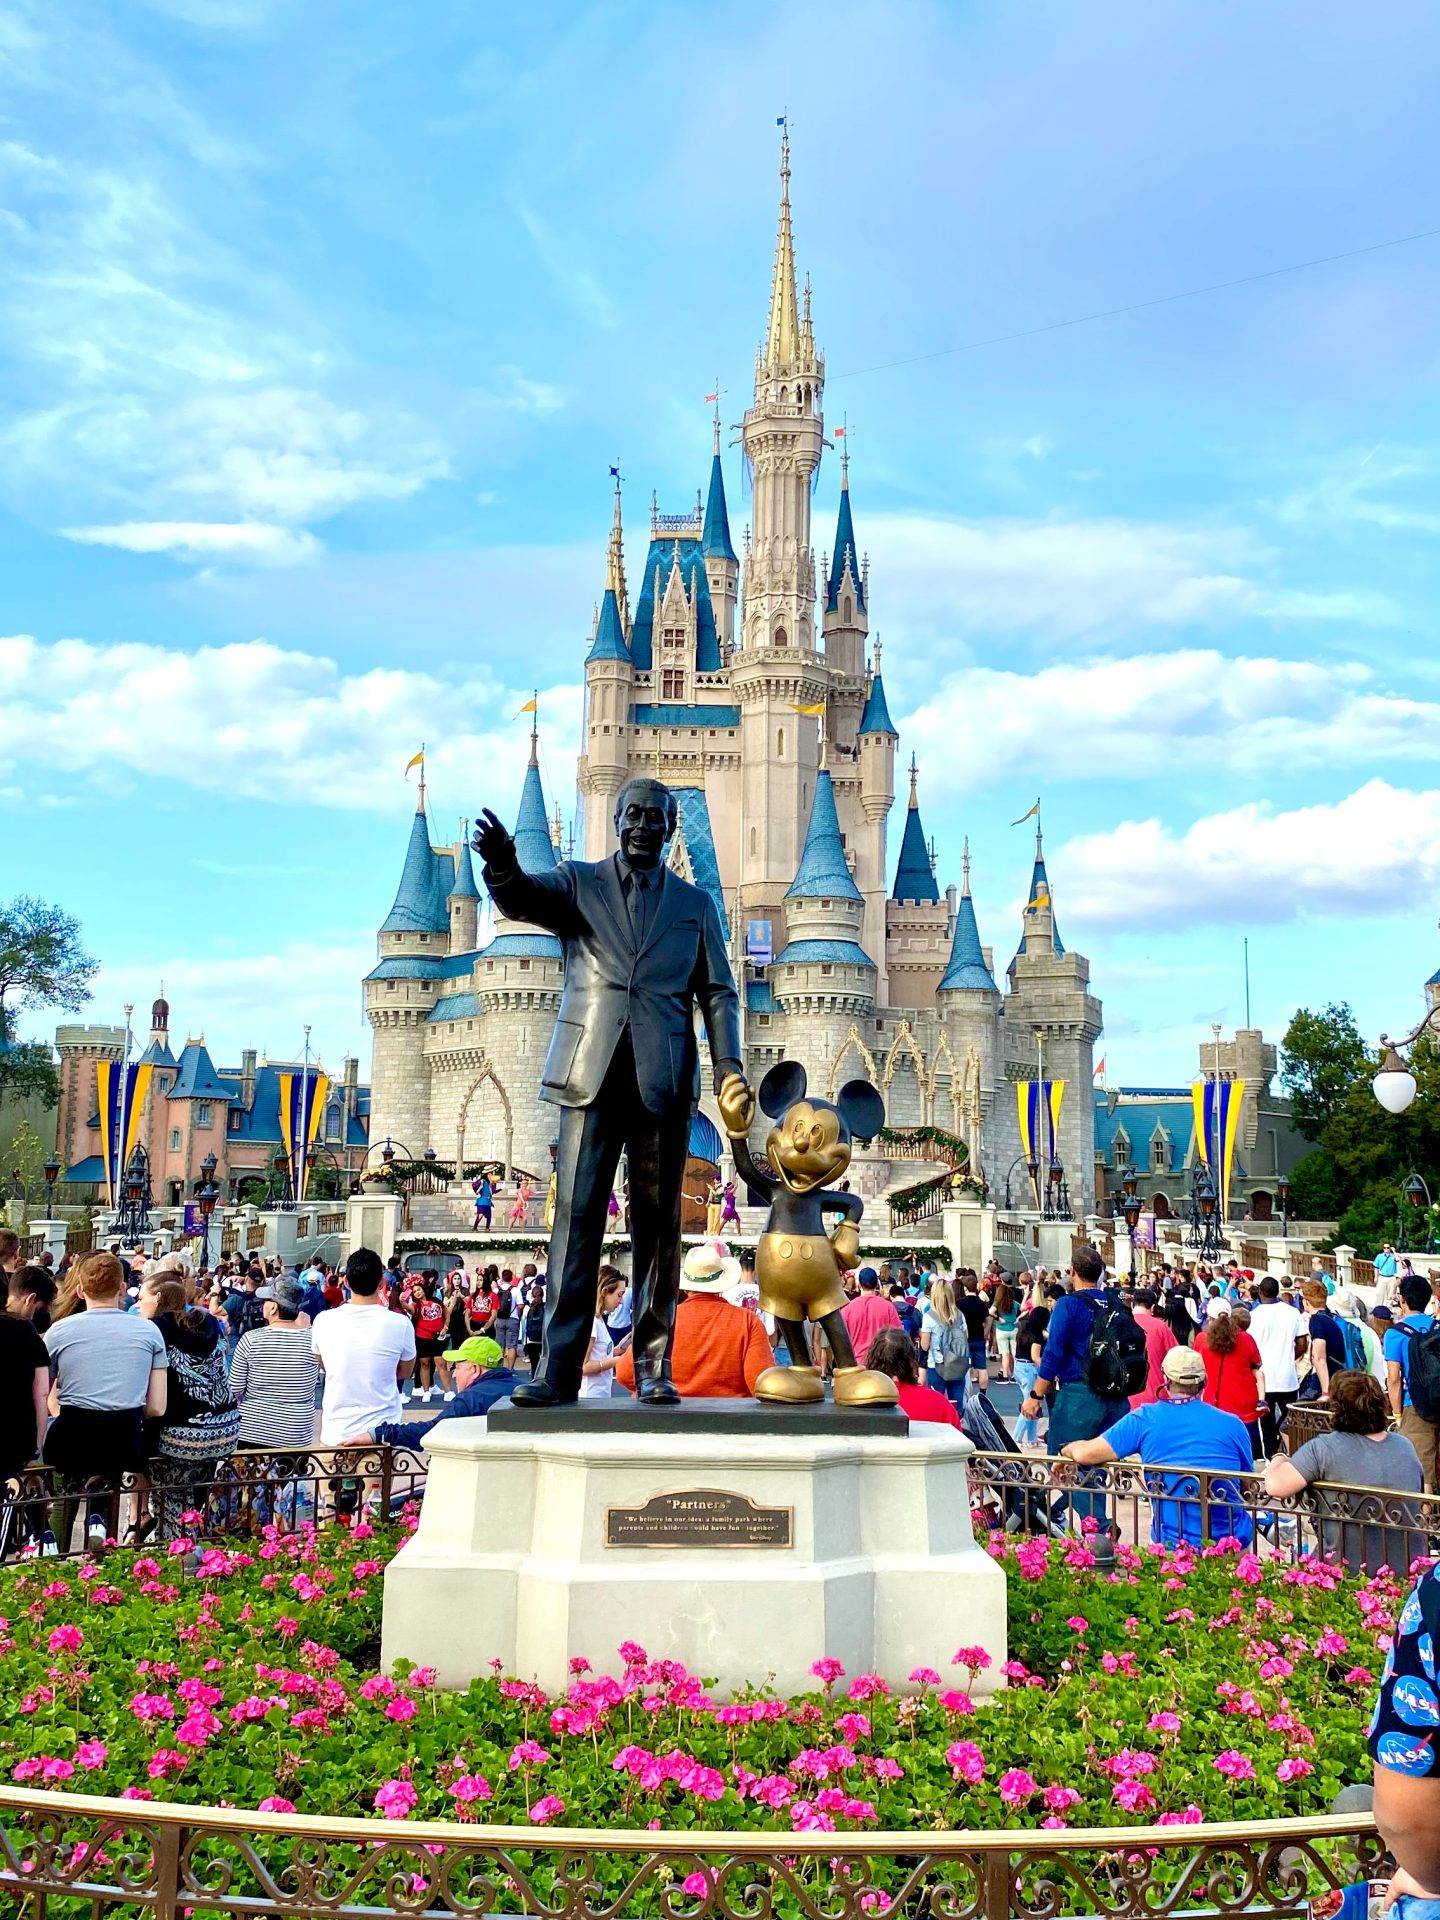 The Disney World Orlando Castle, with the Walt Disney statue in front